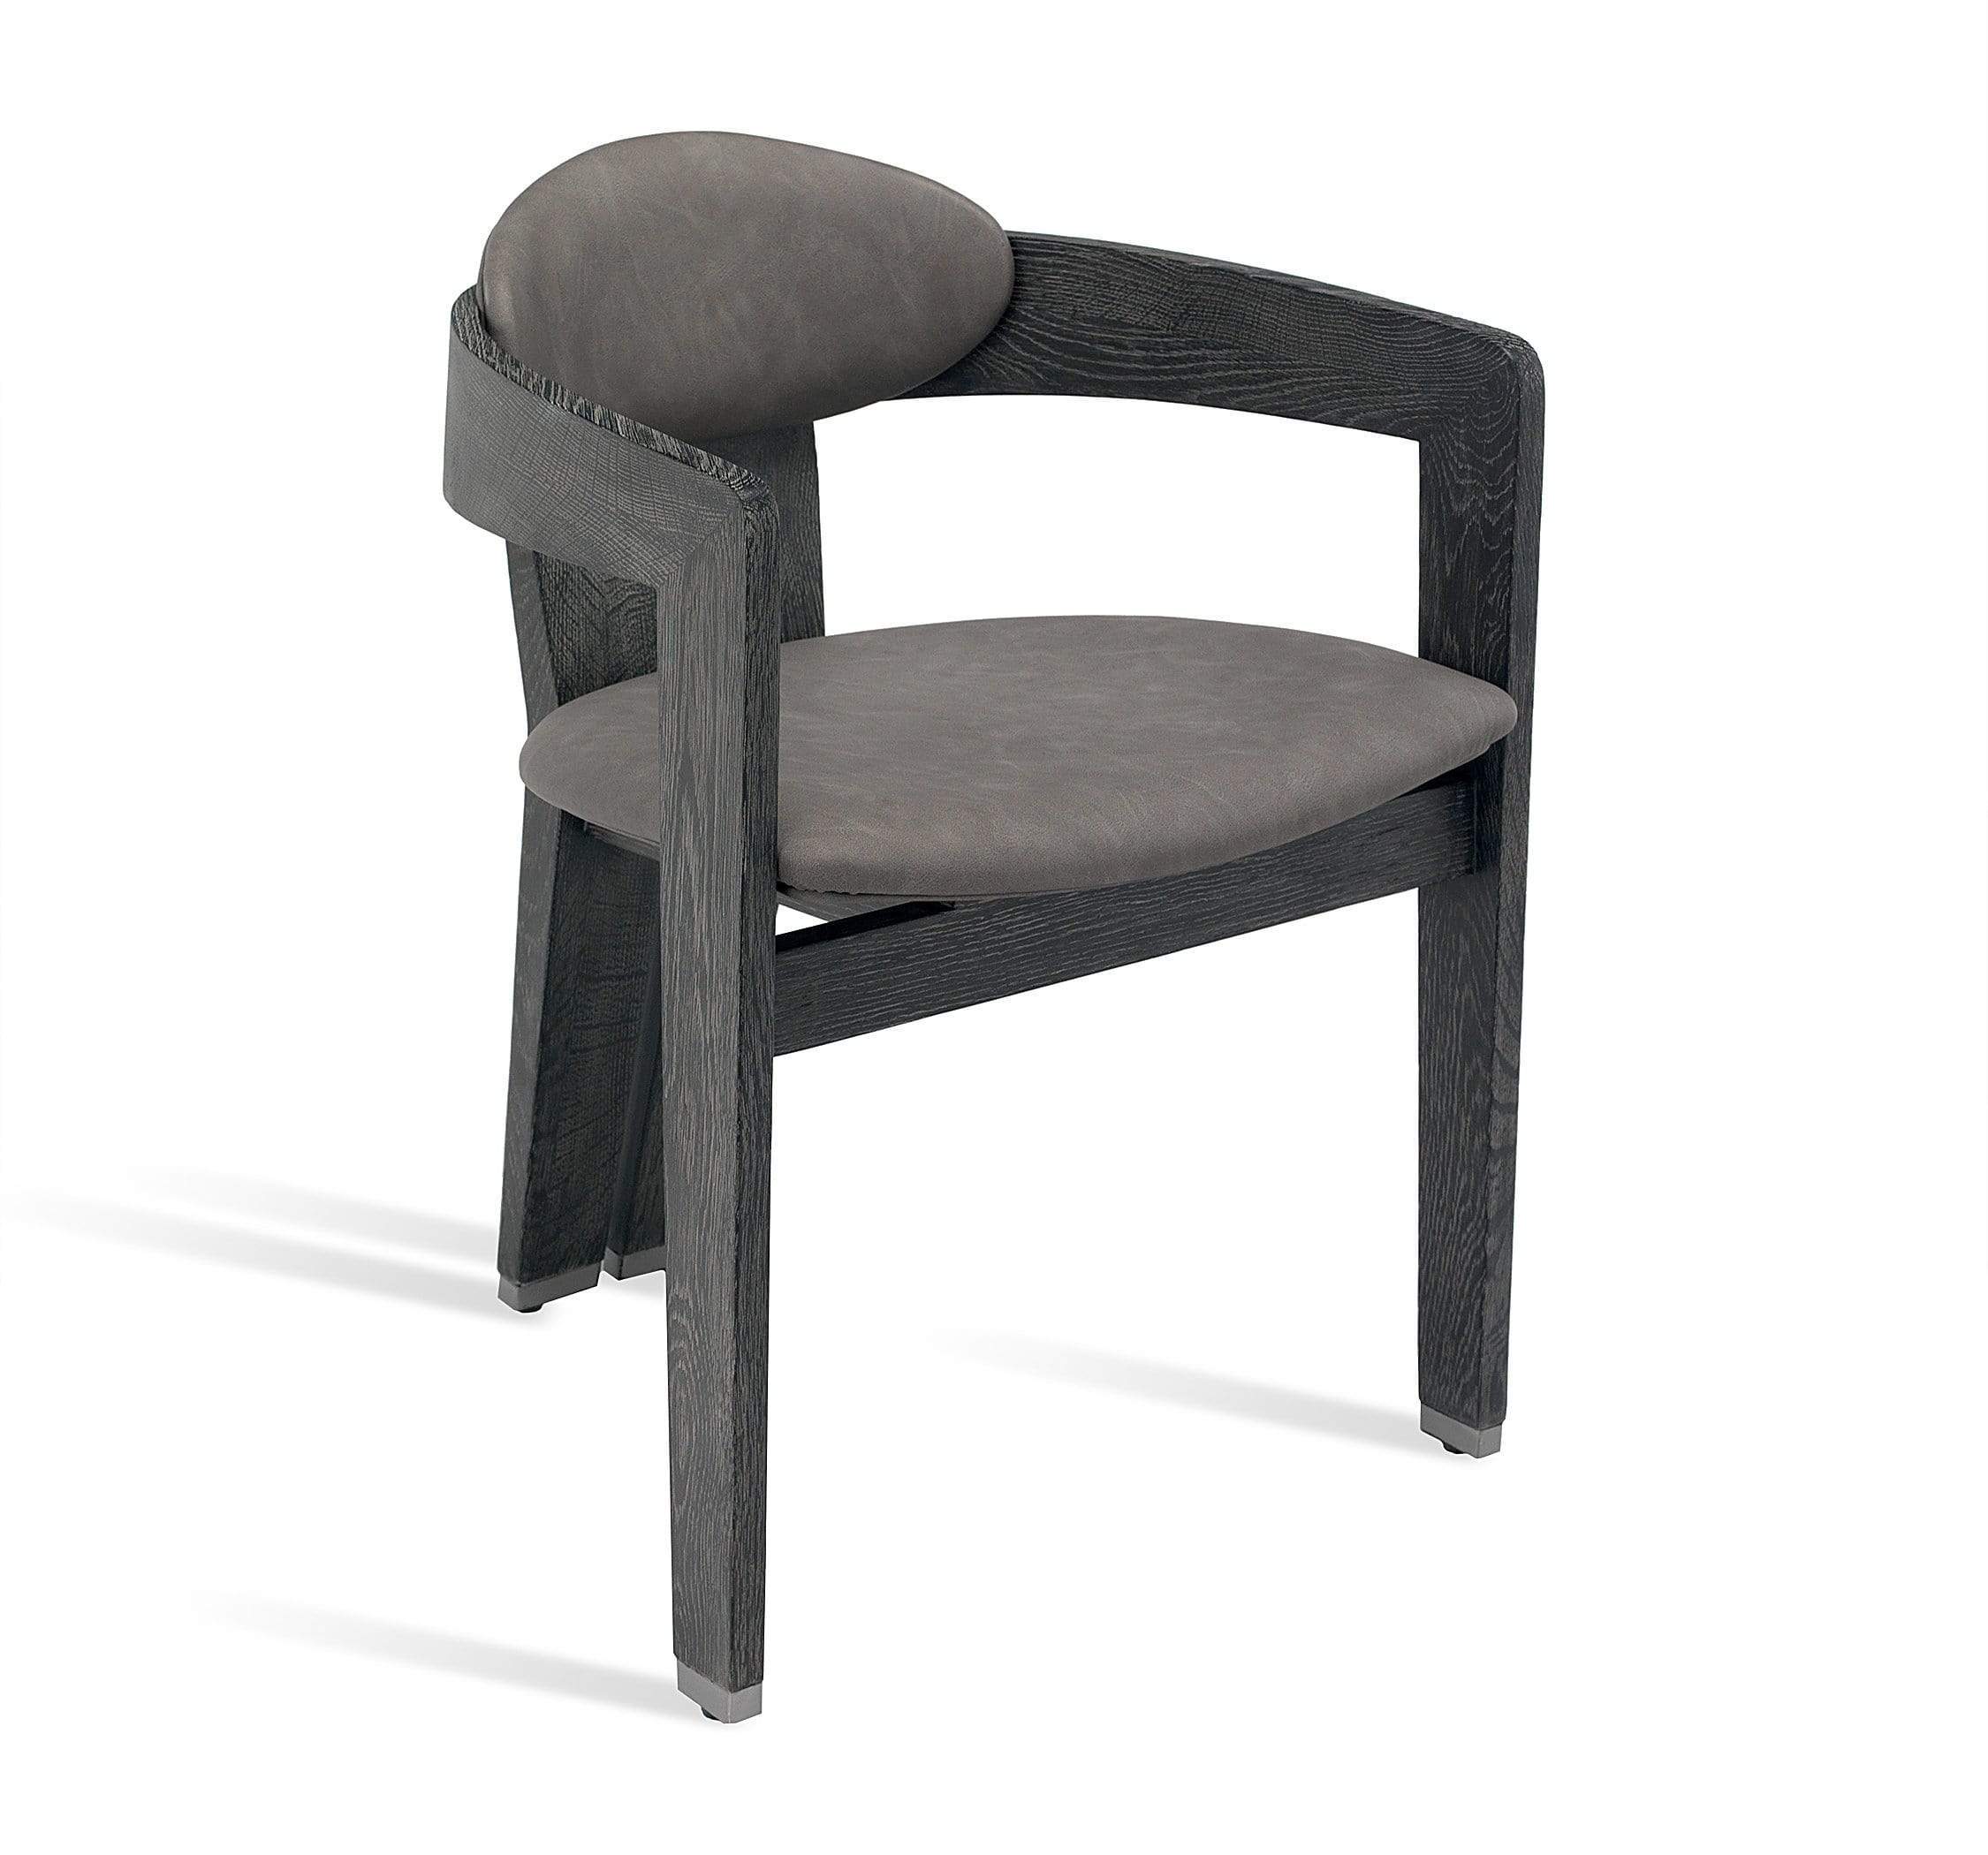 Interlude Home Maryl Dining Chair in Charcoal